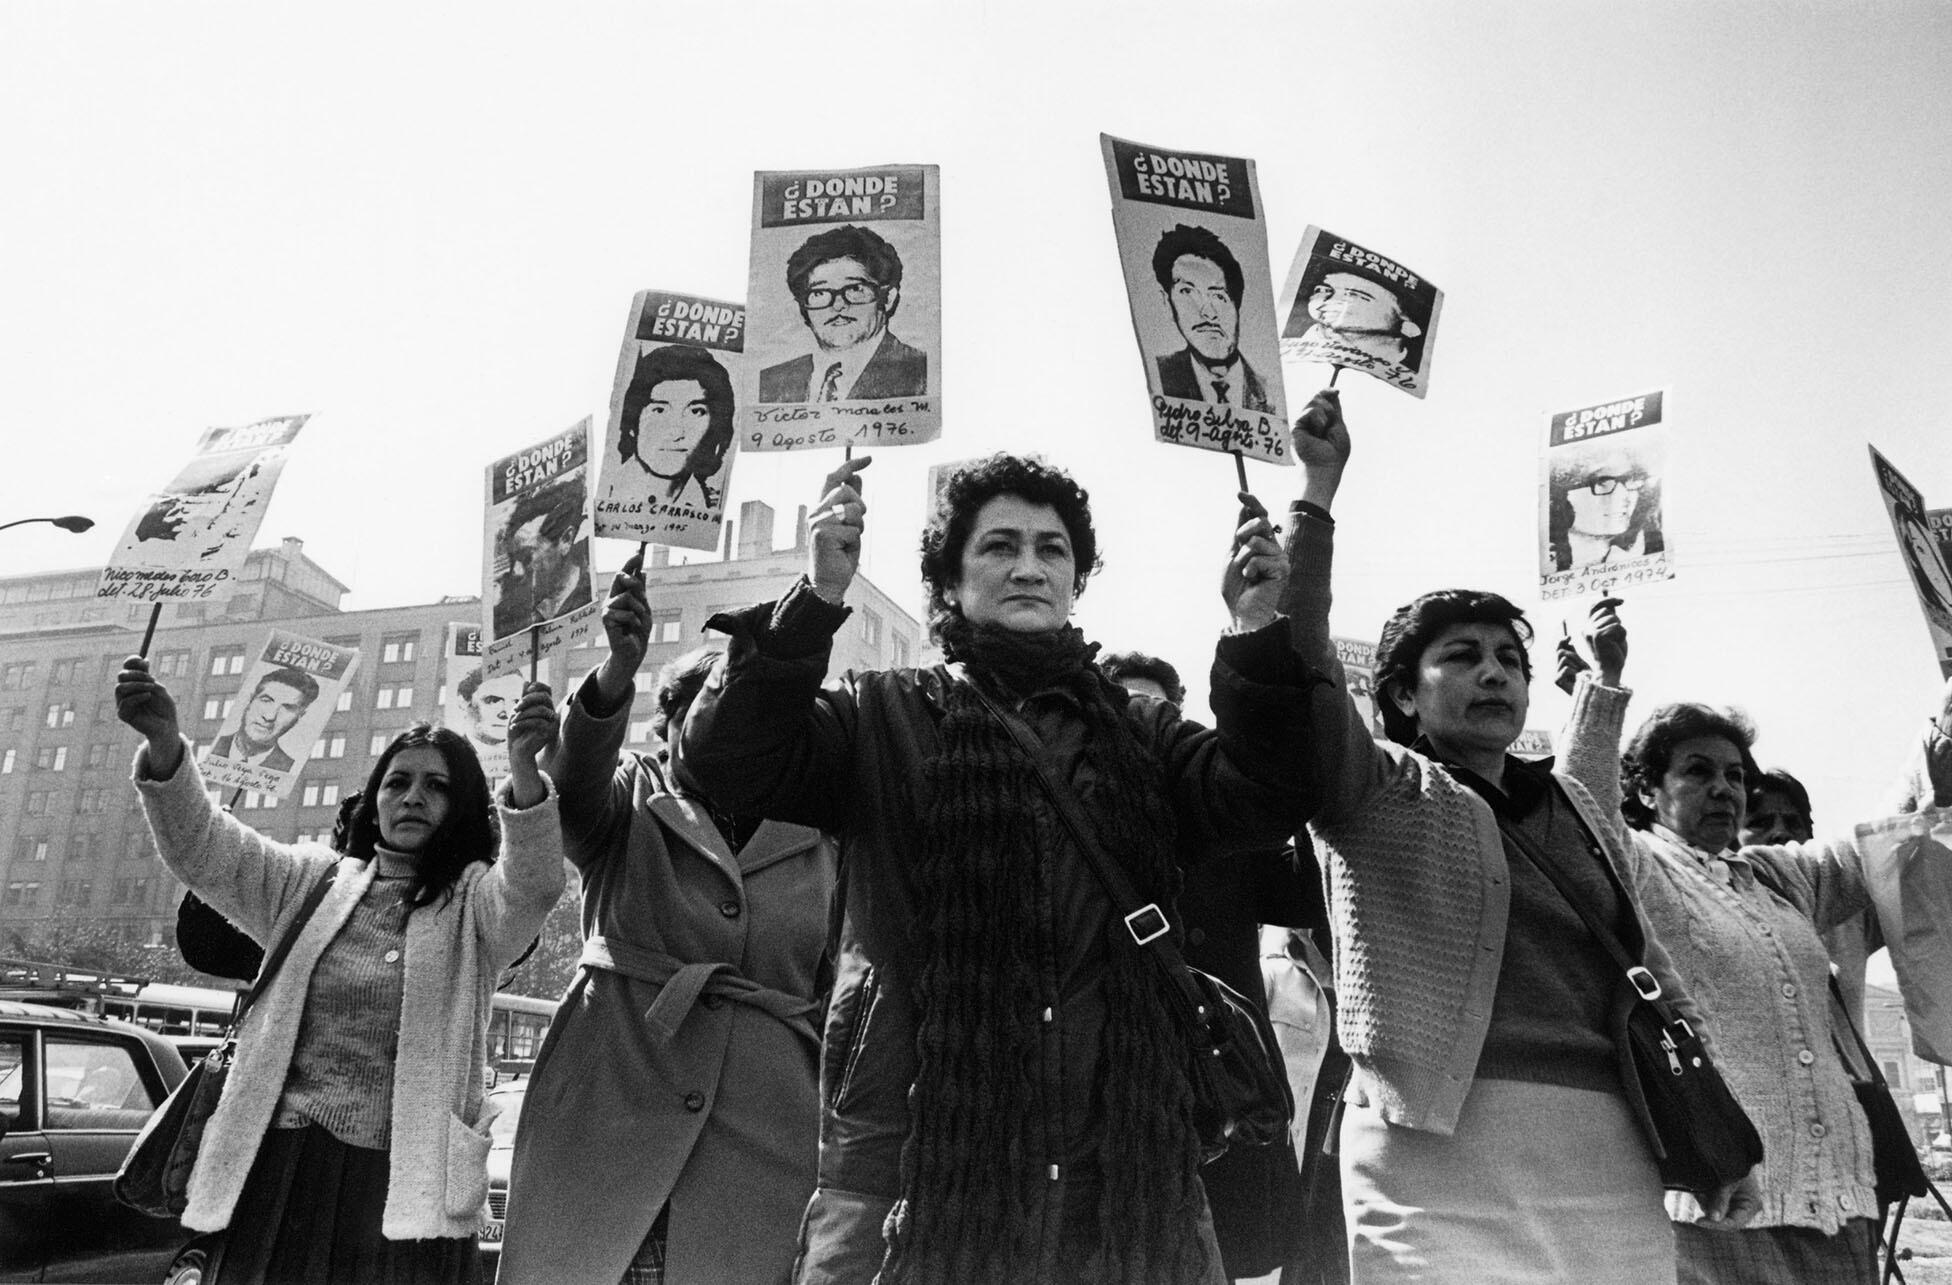 Families of the disappeared protest during the Pinochet dictatorship. (Photo by Kena Lorenzini.)